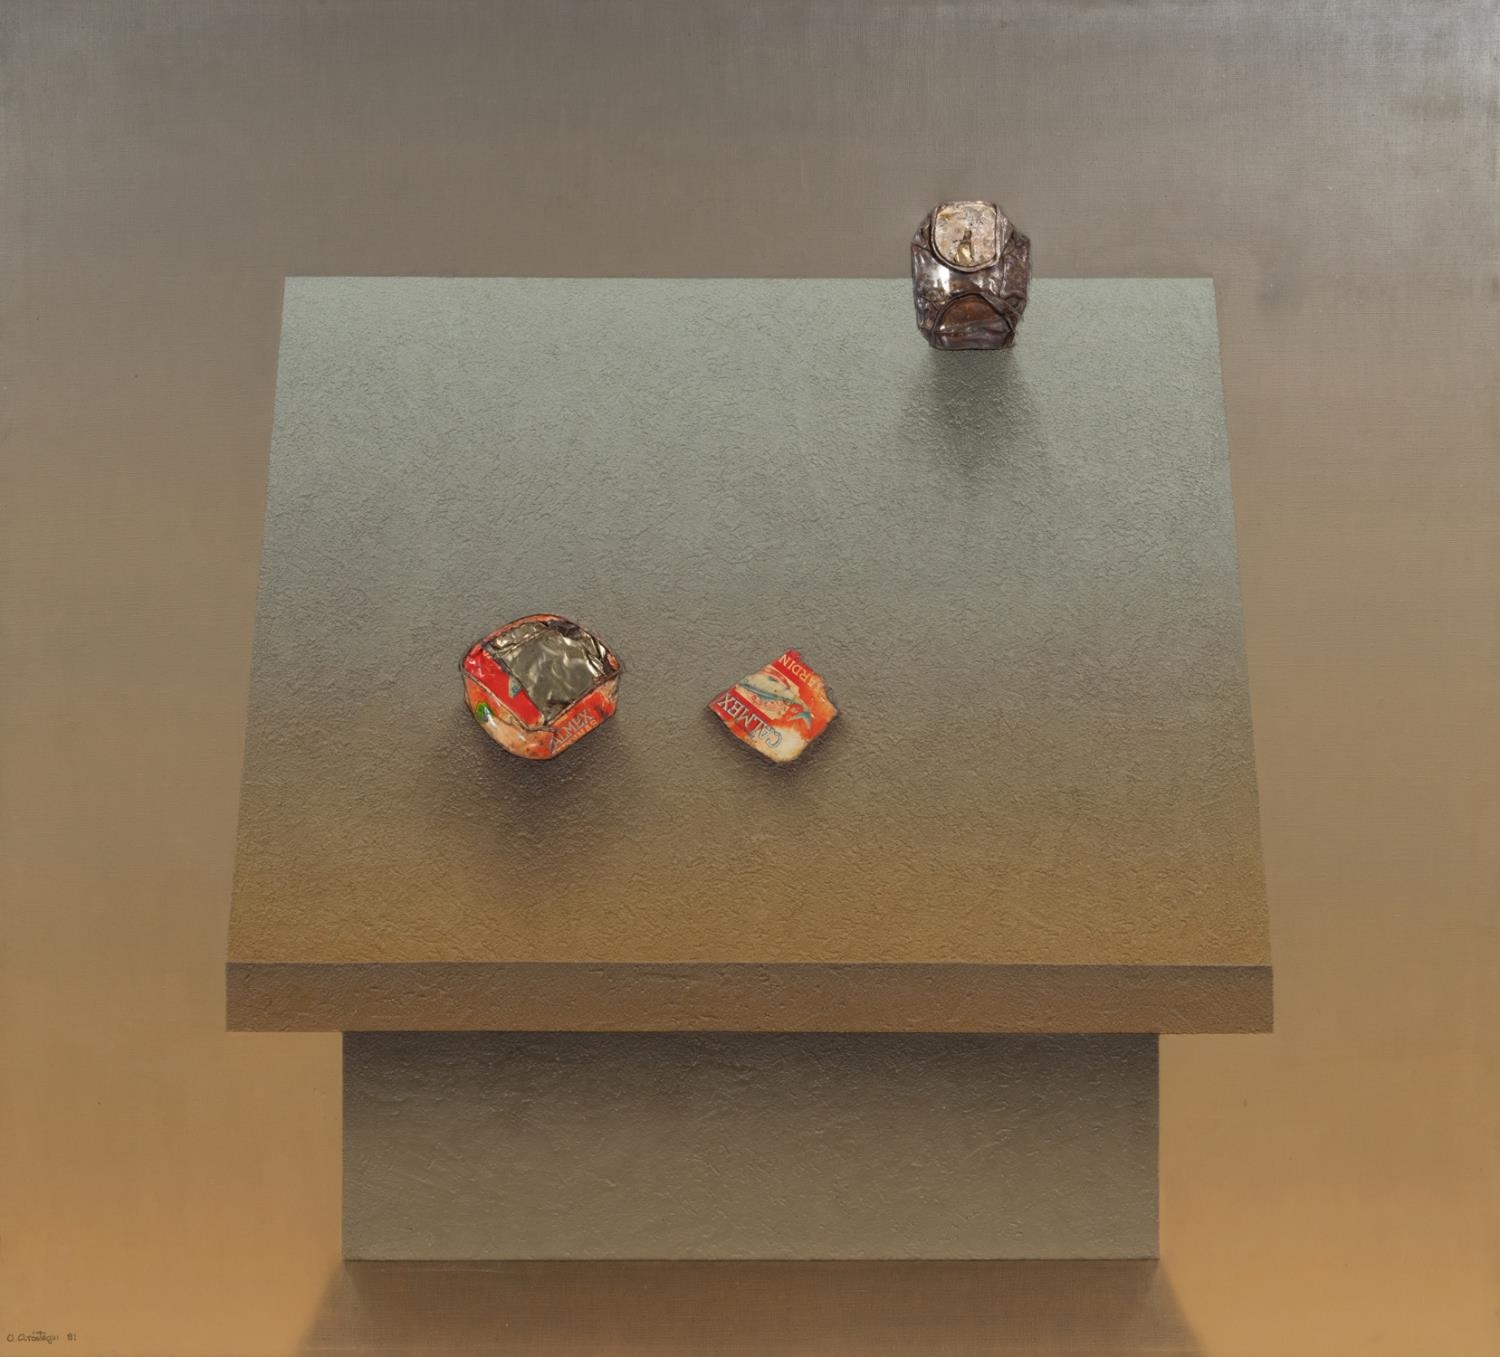 Artwork by Alejandro Arostegui, Mesa Y Objetos No. 1 (Table and Objects), 1981, Made of mixed media and oil on canvas